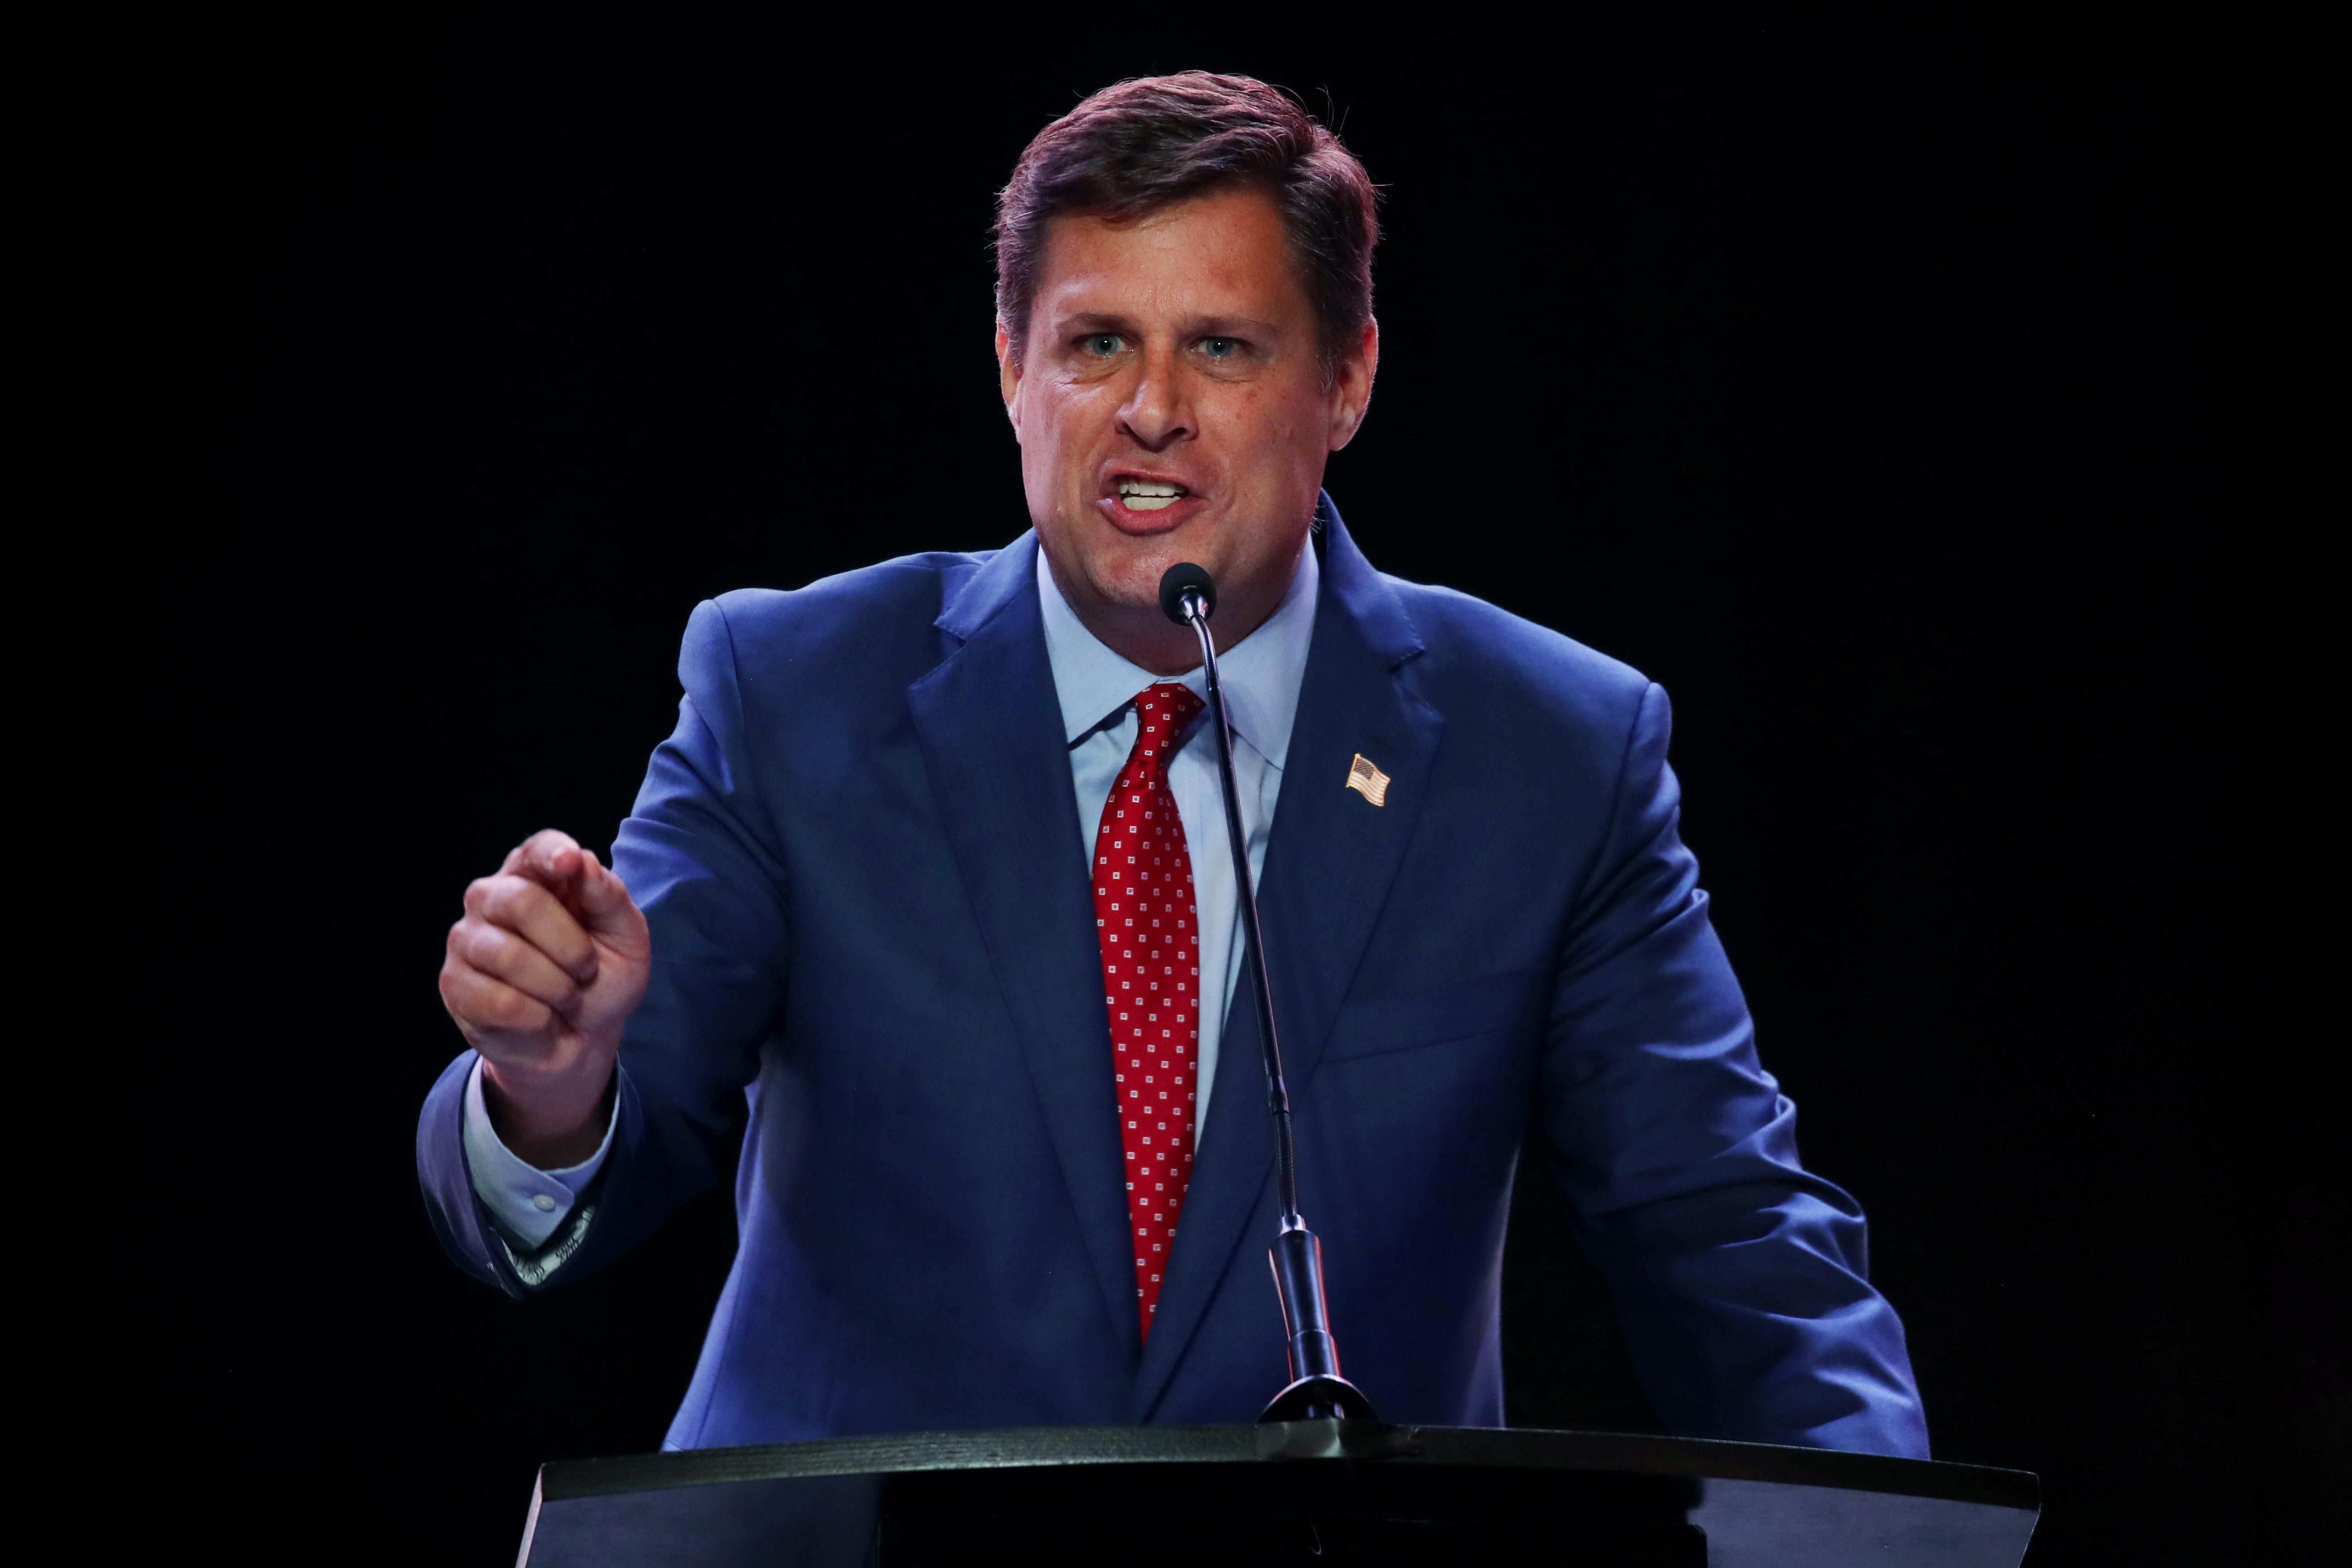 Massachusetts gubernatorial candidate Geoff Diehl speaks during the 2022 Republican State Convention in Springfield, Massachusetts on May 21, 2022.